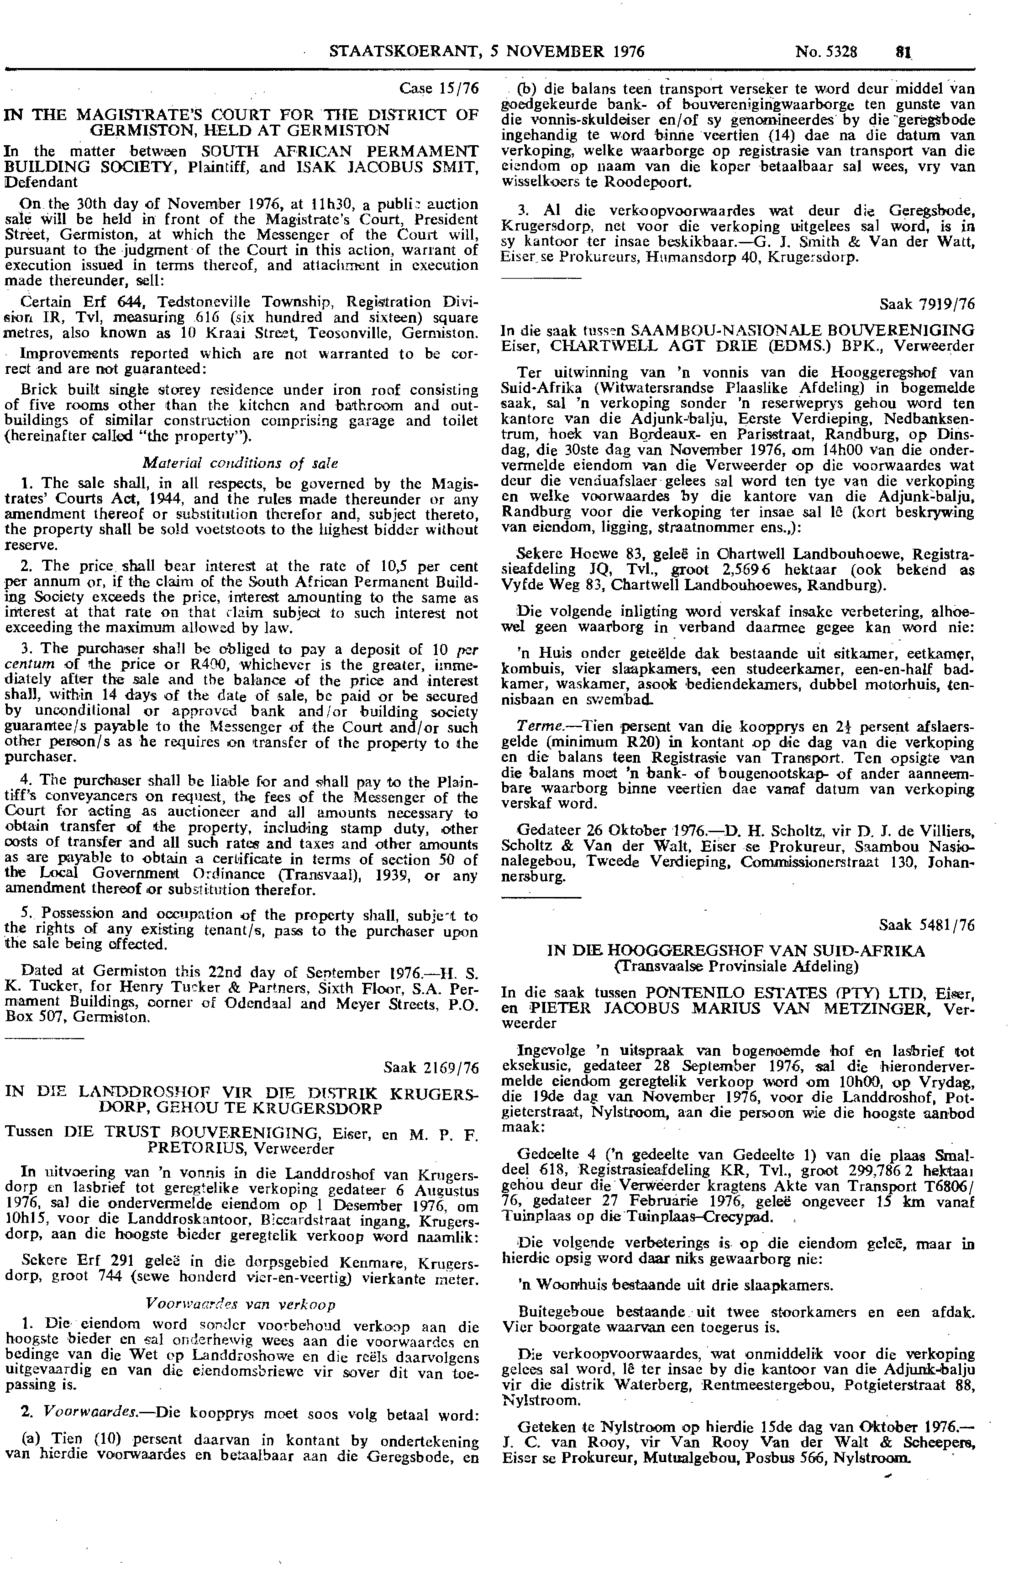 Reproduced by abinet Online in terms of Government Printer s Copyright Authority No. 10505 dated 02 February 1998 TAATKOERANT, 5 NOVEMBER 1976 No. 81.